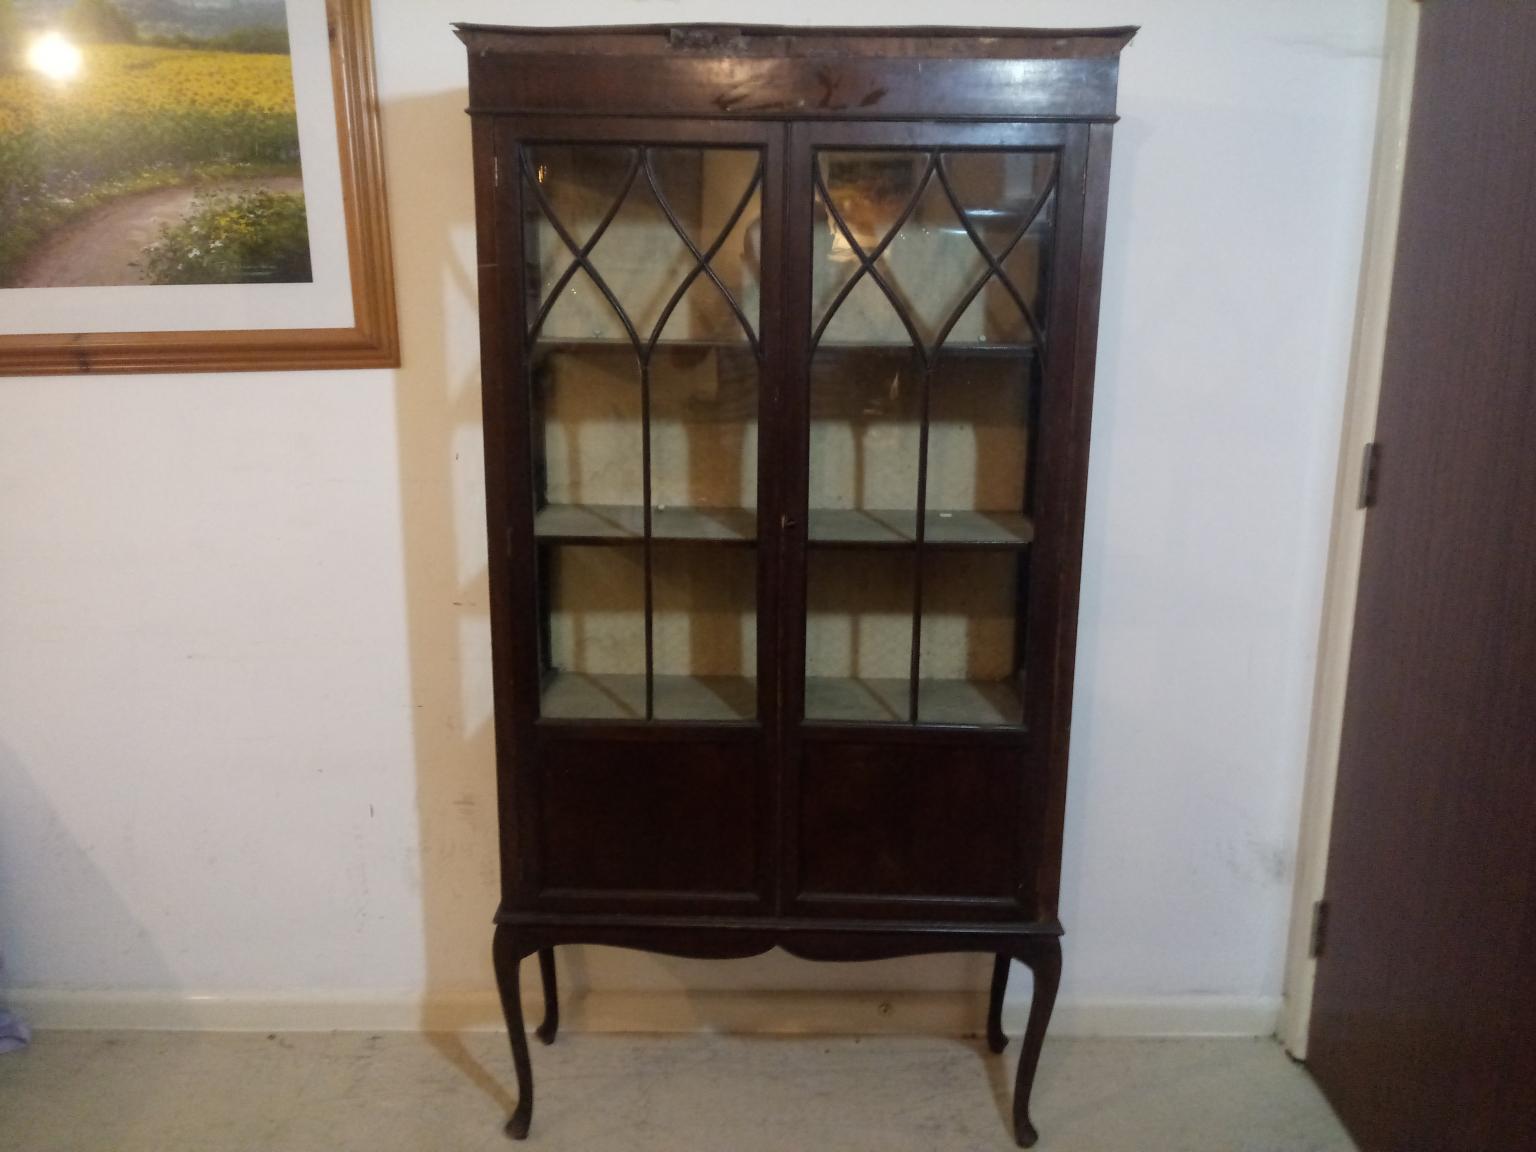 Antique Glass Display Cabinet With 3 Shelves In So22 Winchester